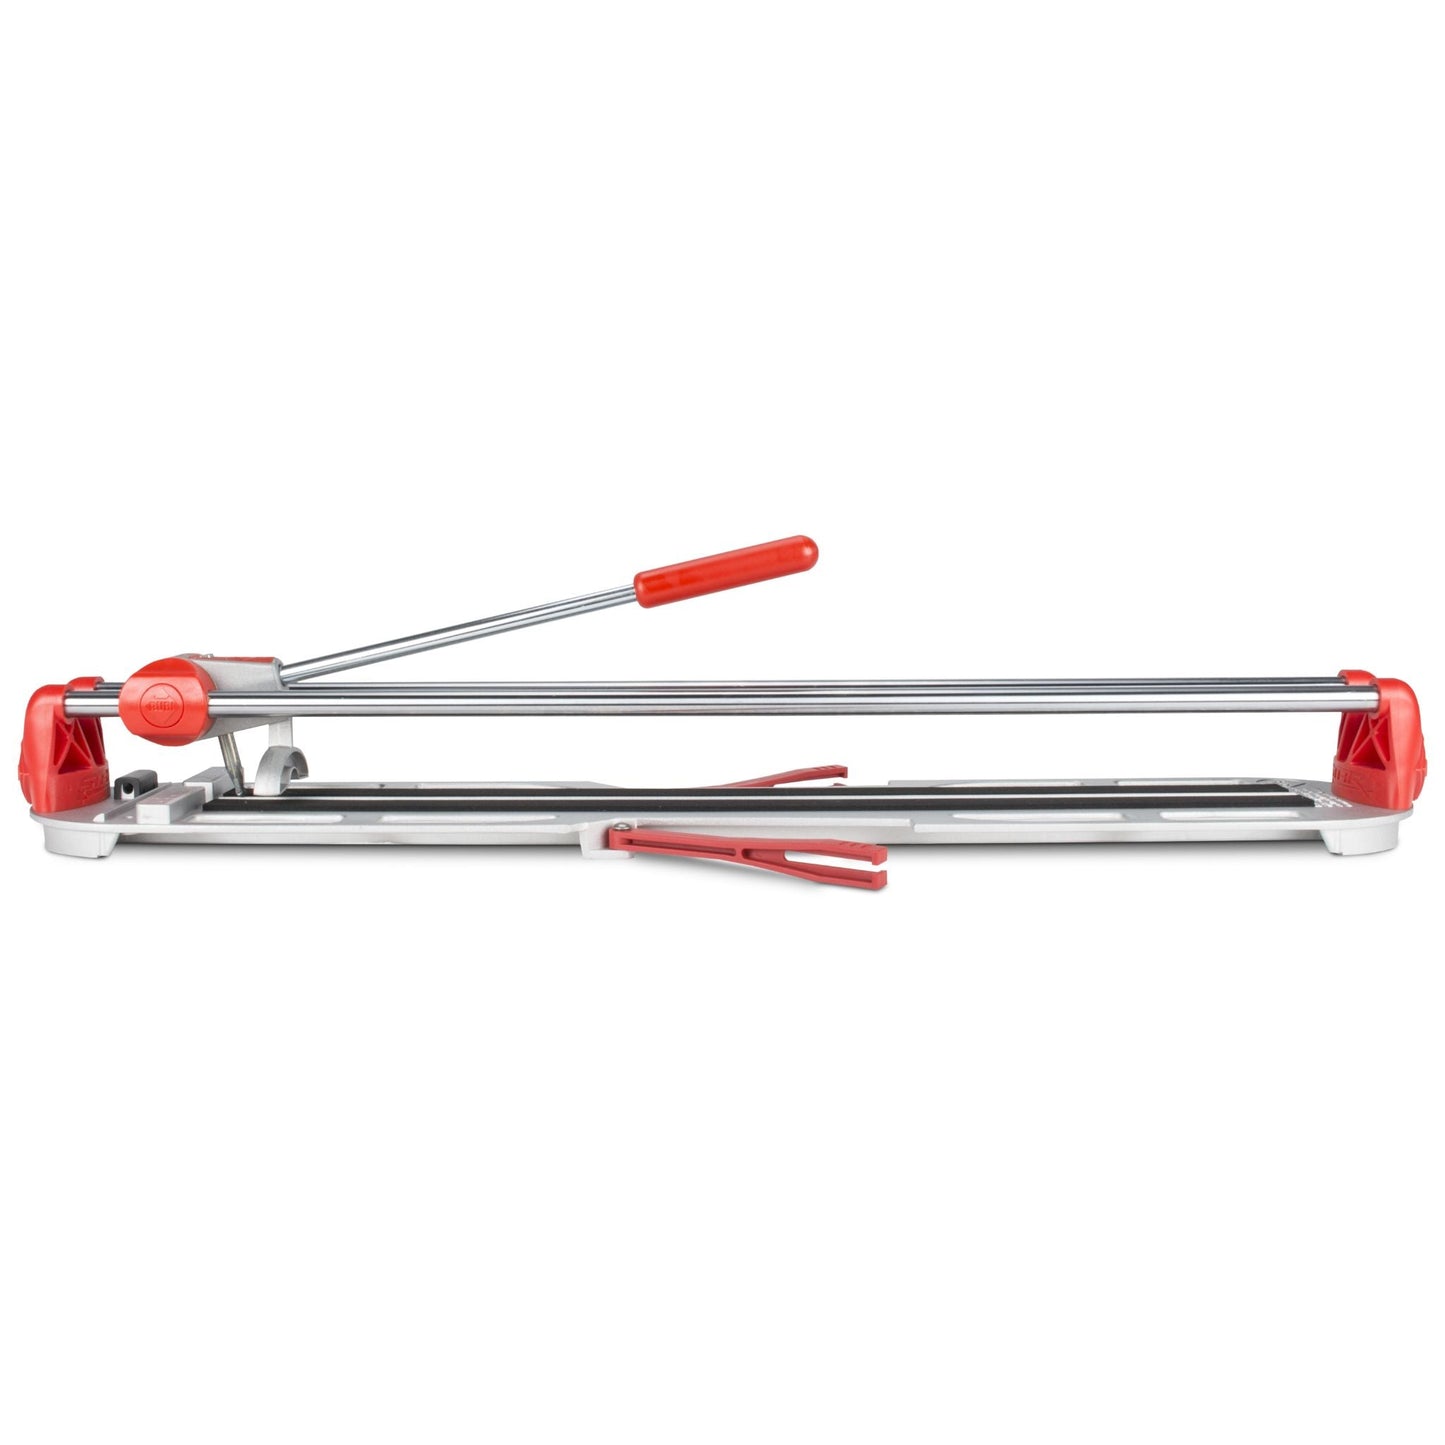 Rubi Star-63 Manual Tile Cutter for Tiles Up To 2 Feet With Carrying Case